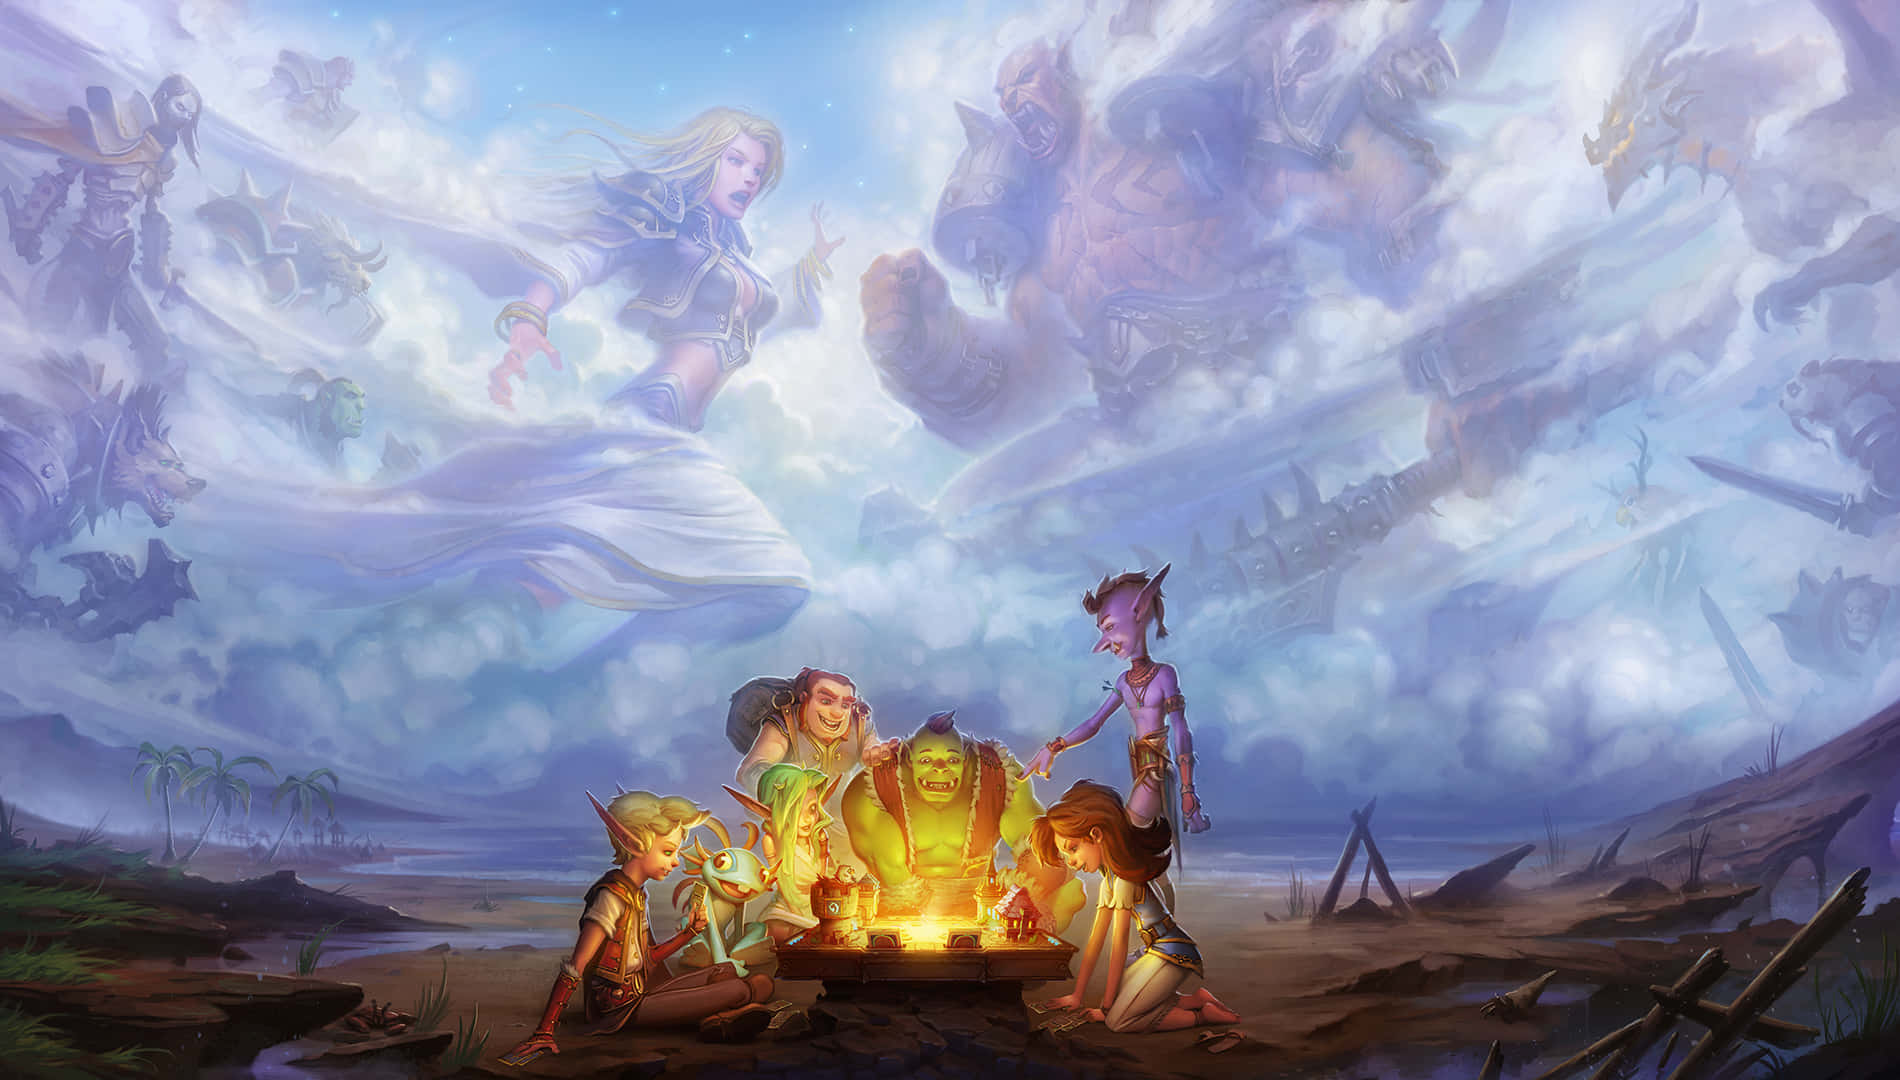 Take on the best players of Hearthstone